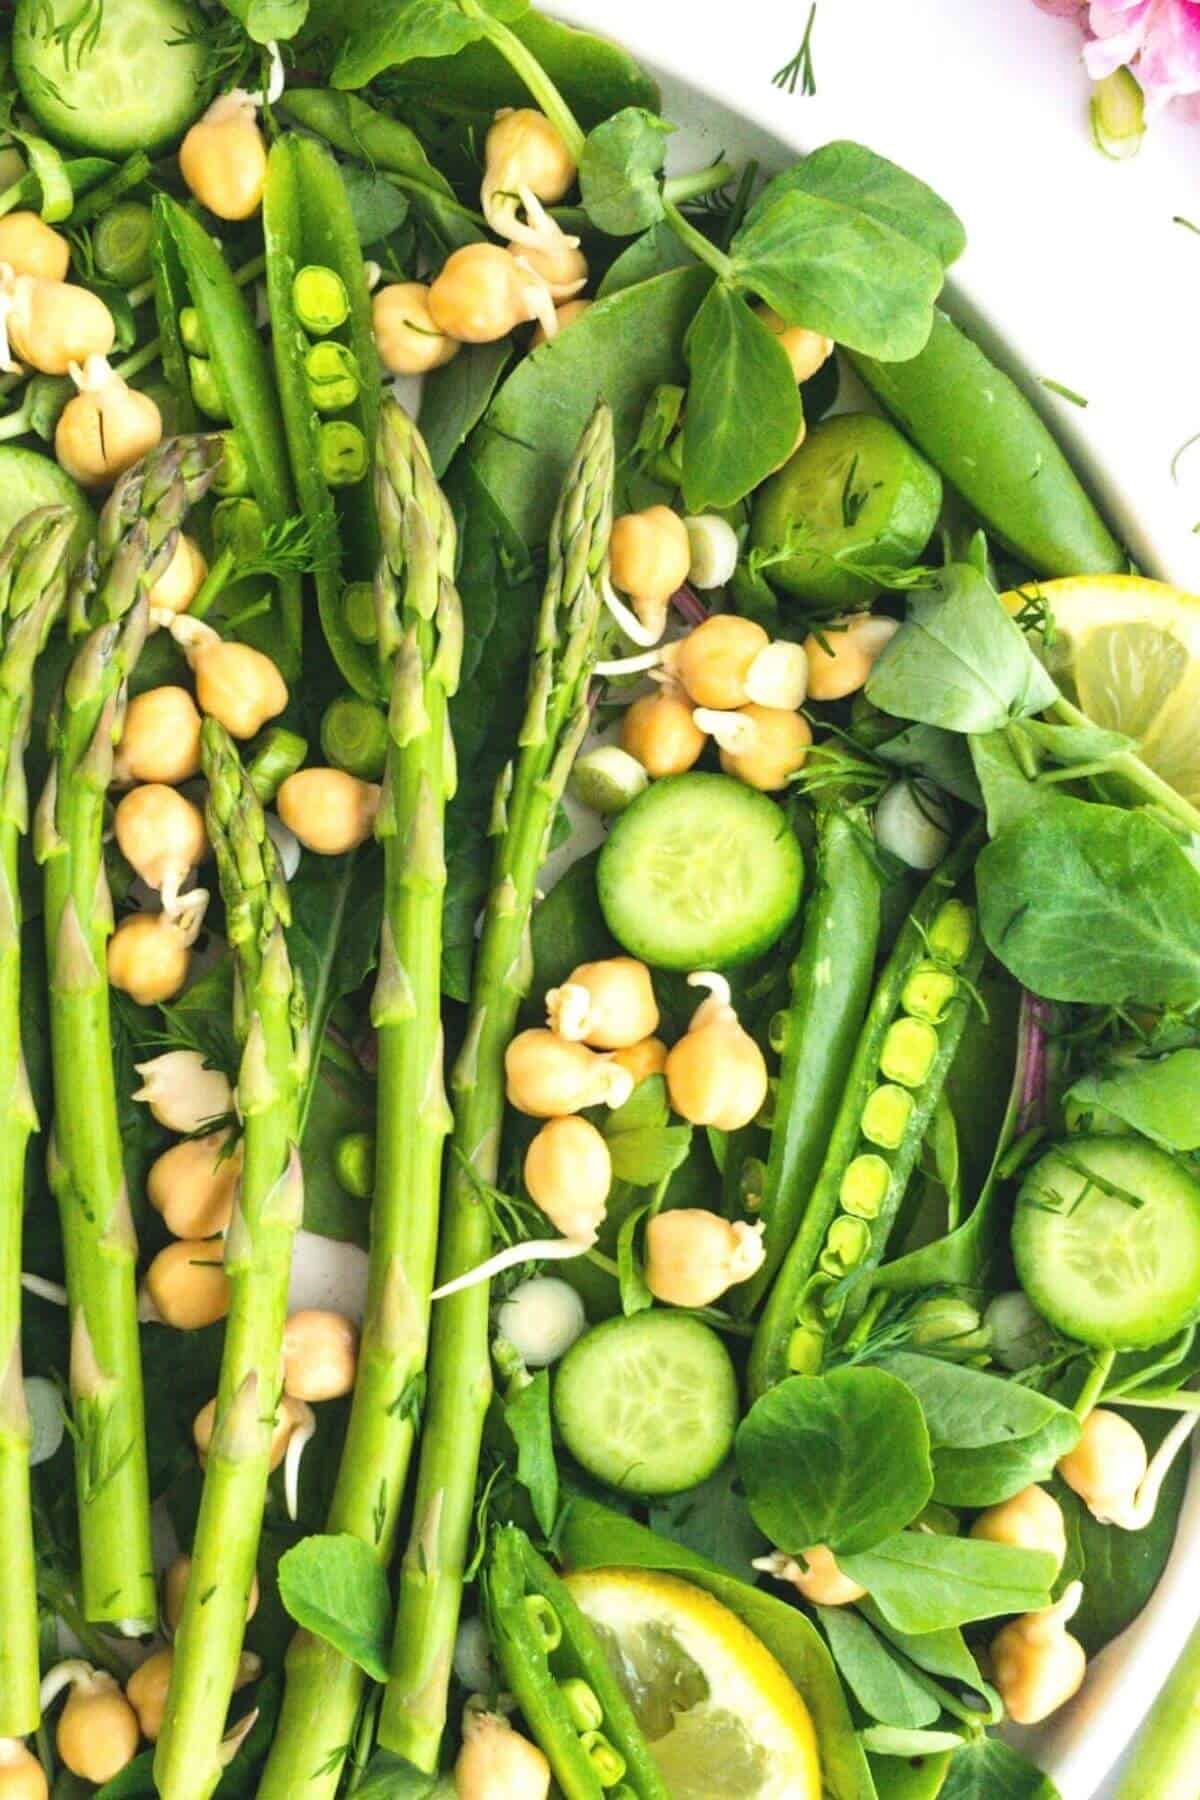 Close up of a plate with pea shoots, asparagus, peas, chickpea sprouts, and lemon slices.